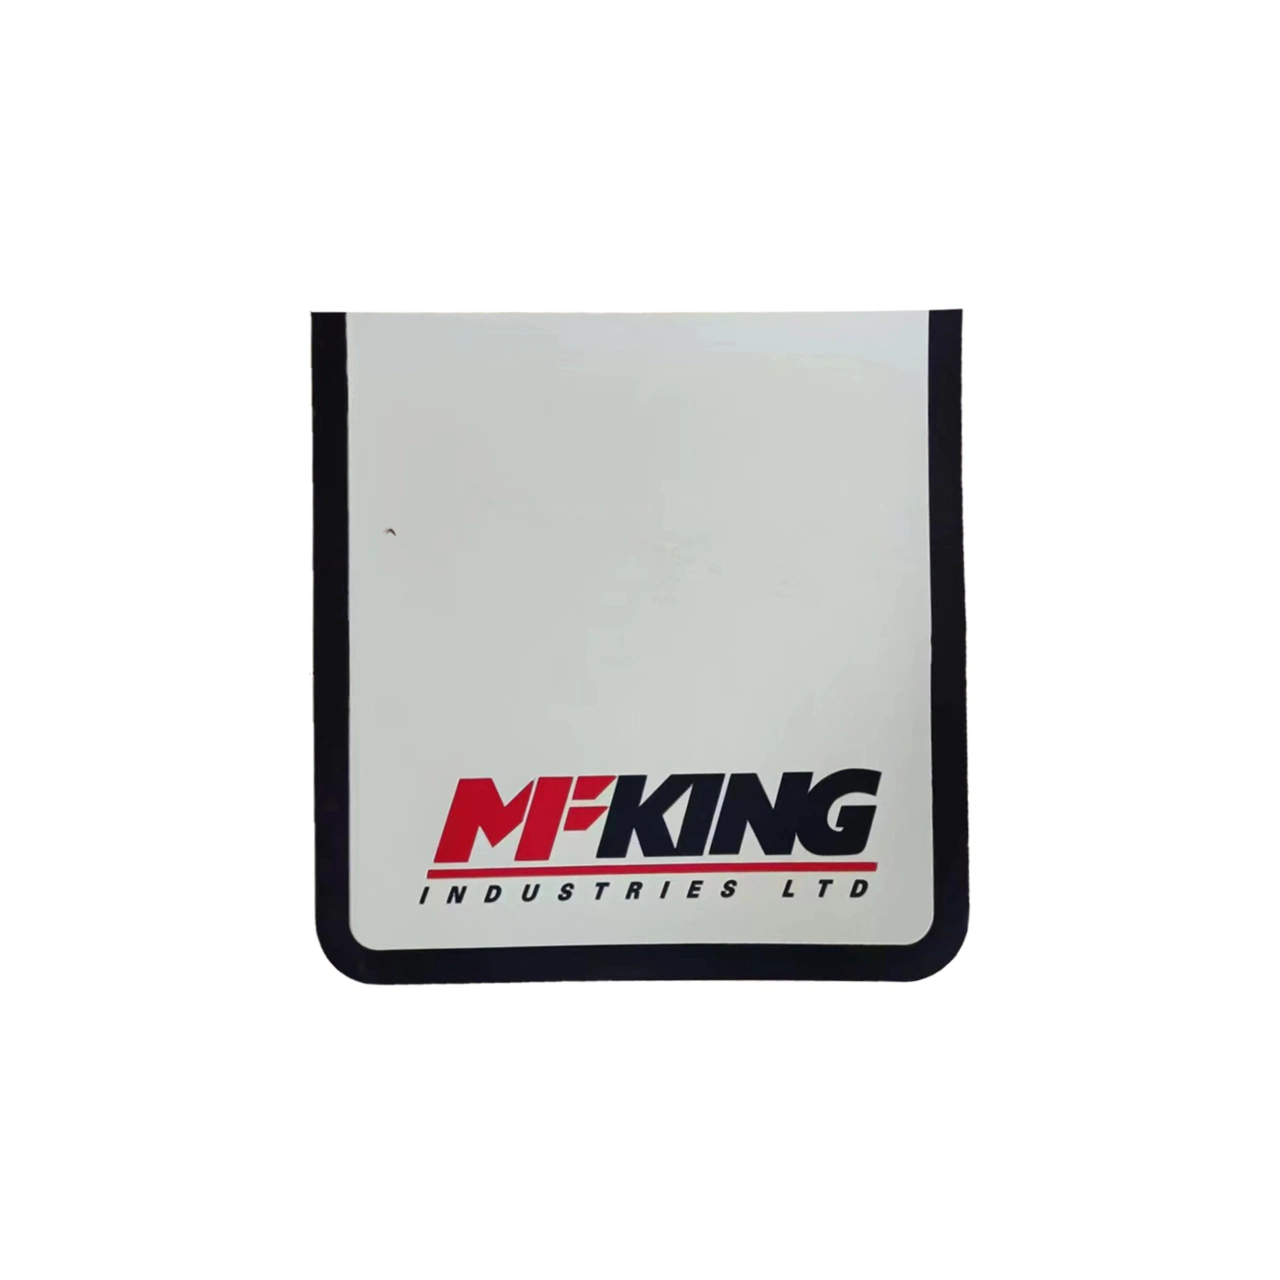 Customizable Rubber PVC Mud Flaps for Trucks Trailers Motorhomes